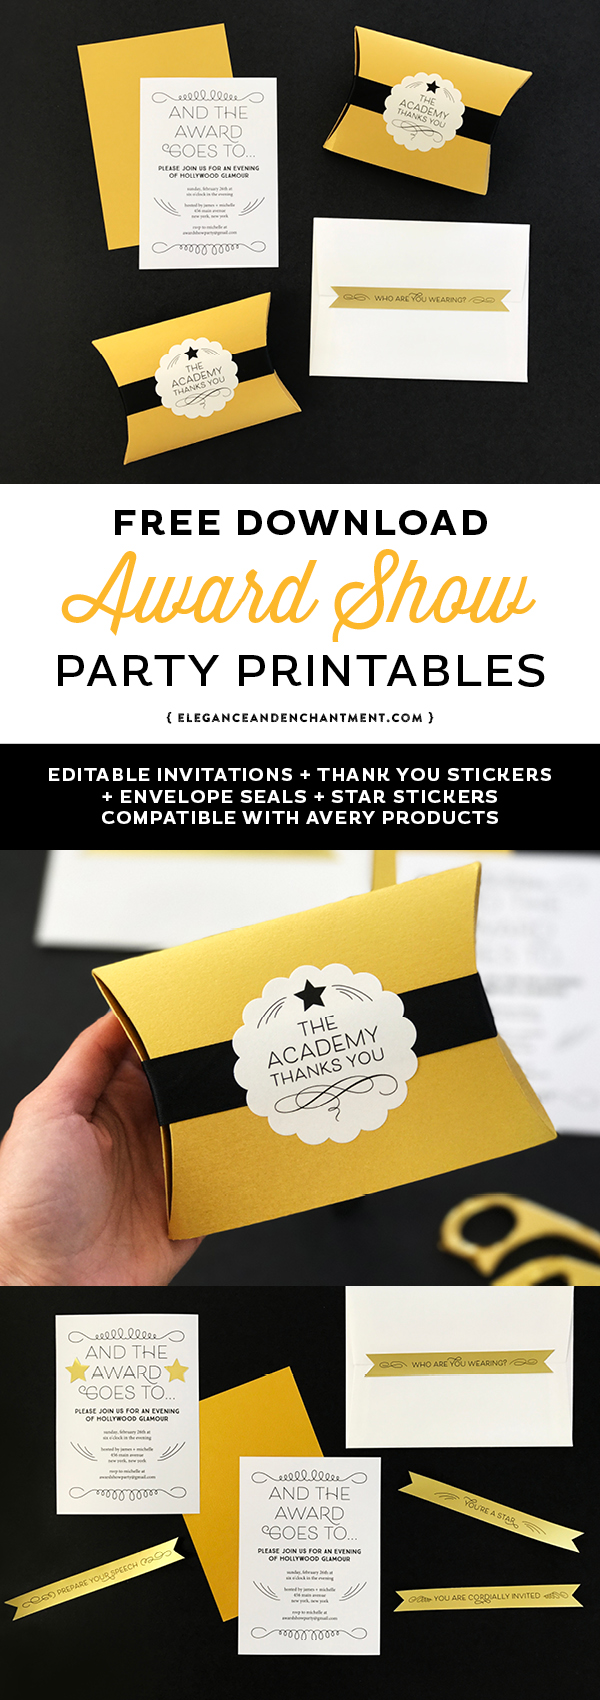 Get ready for the Oscars, Emmys, Golden Globes, Grammys and Tony Awards with these free award show party printables. Includes an editable invitation, envelope seals, star stickers and thank you sticker seals. Compatible with Avery Products 22836, 4396 and 4395 for easy printing! Designs from Elegance and Enchantment. 